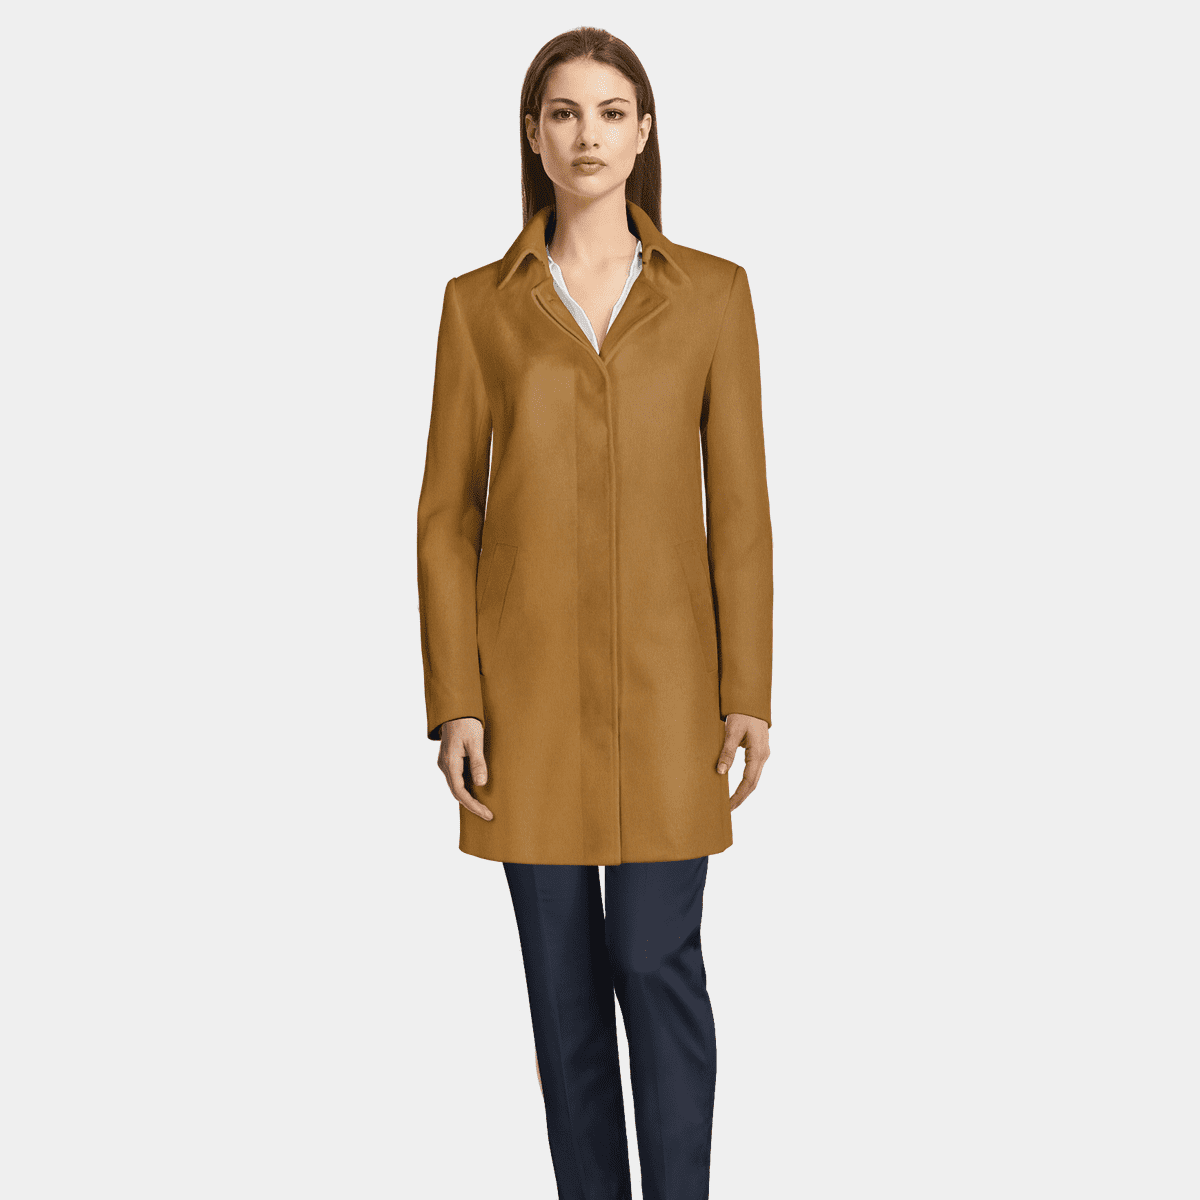 Sumissura Blue Wool Coat with Hidden Buttons